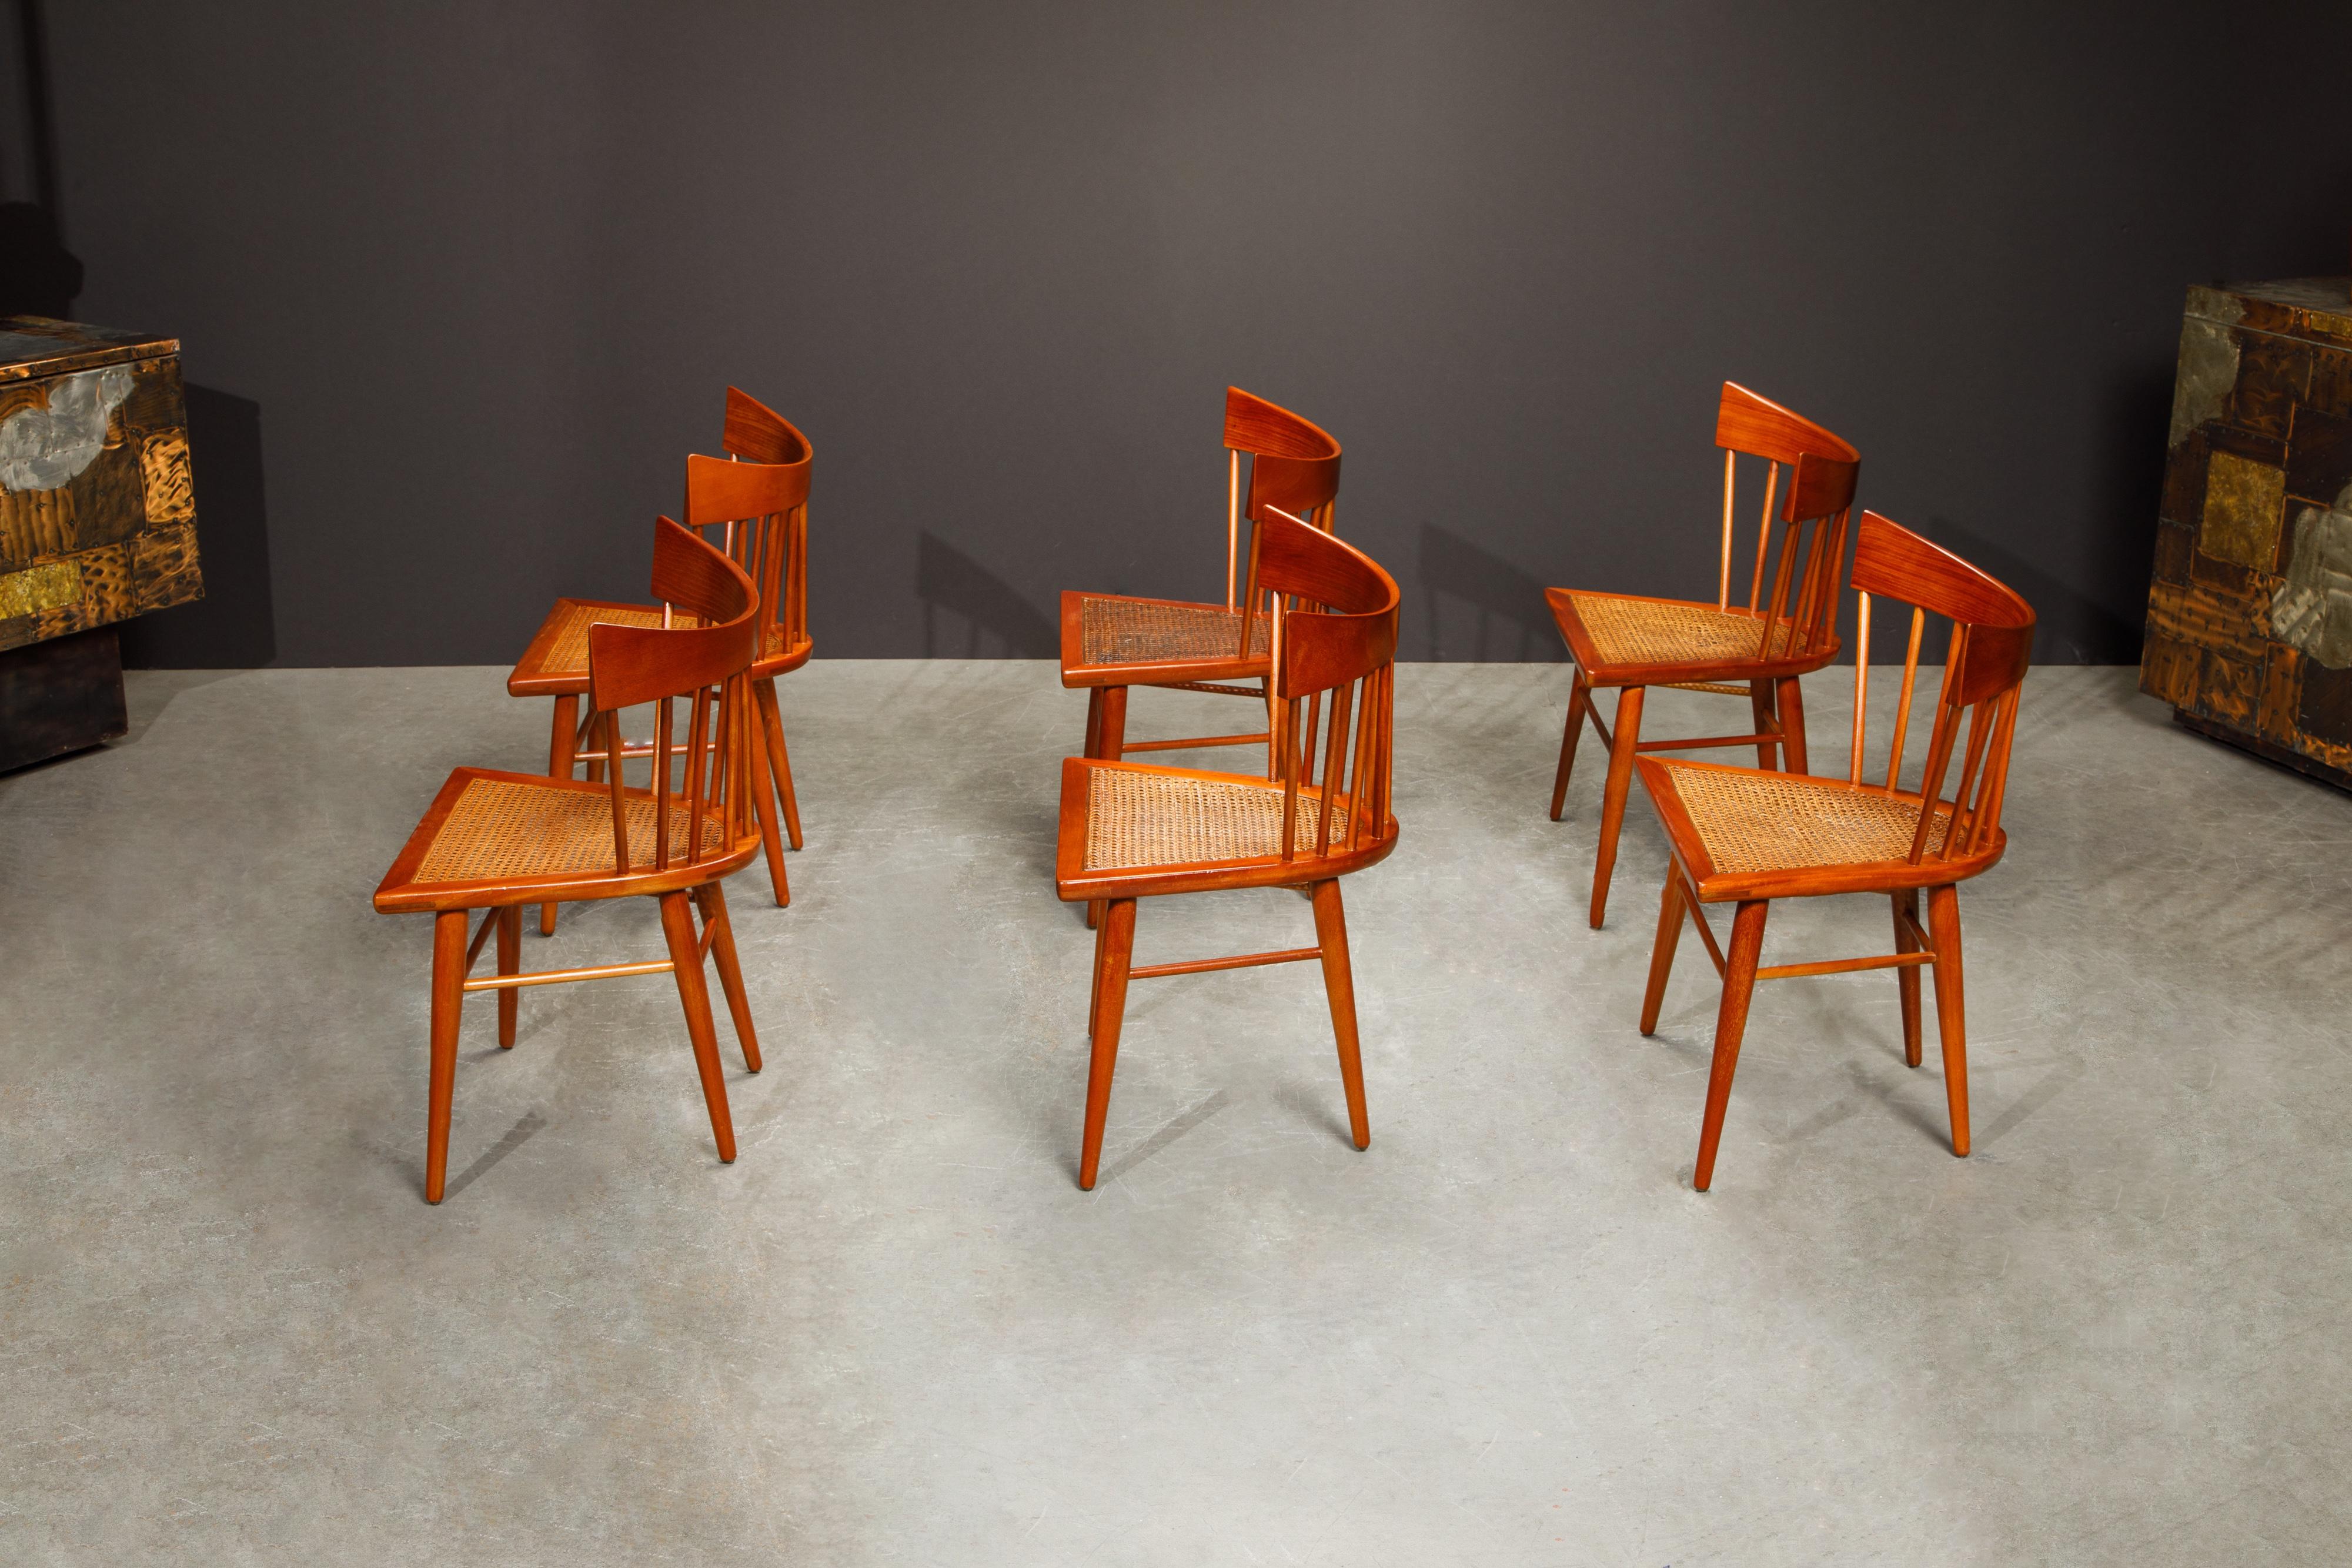 'Yucatan' Dining Chairs by Edmond Spence for Industria Mueblera, 1960s Signed For Sale 1